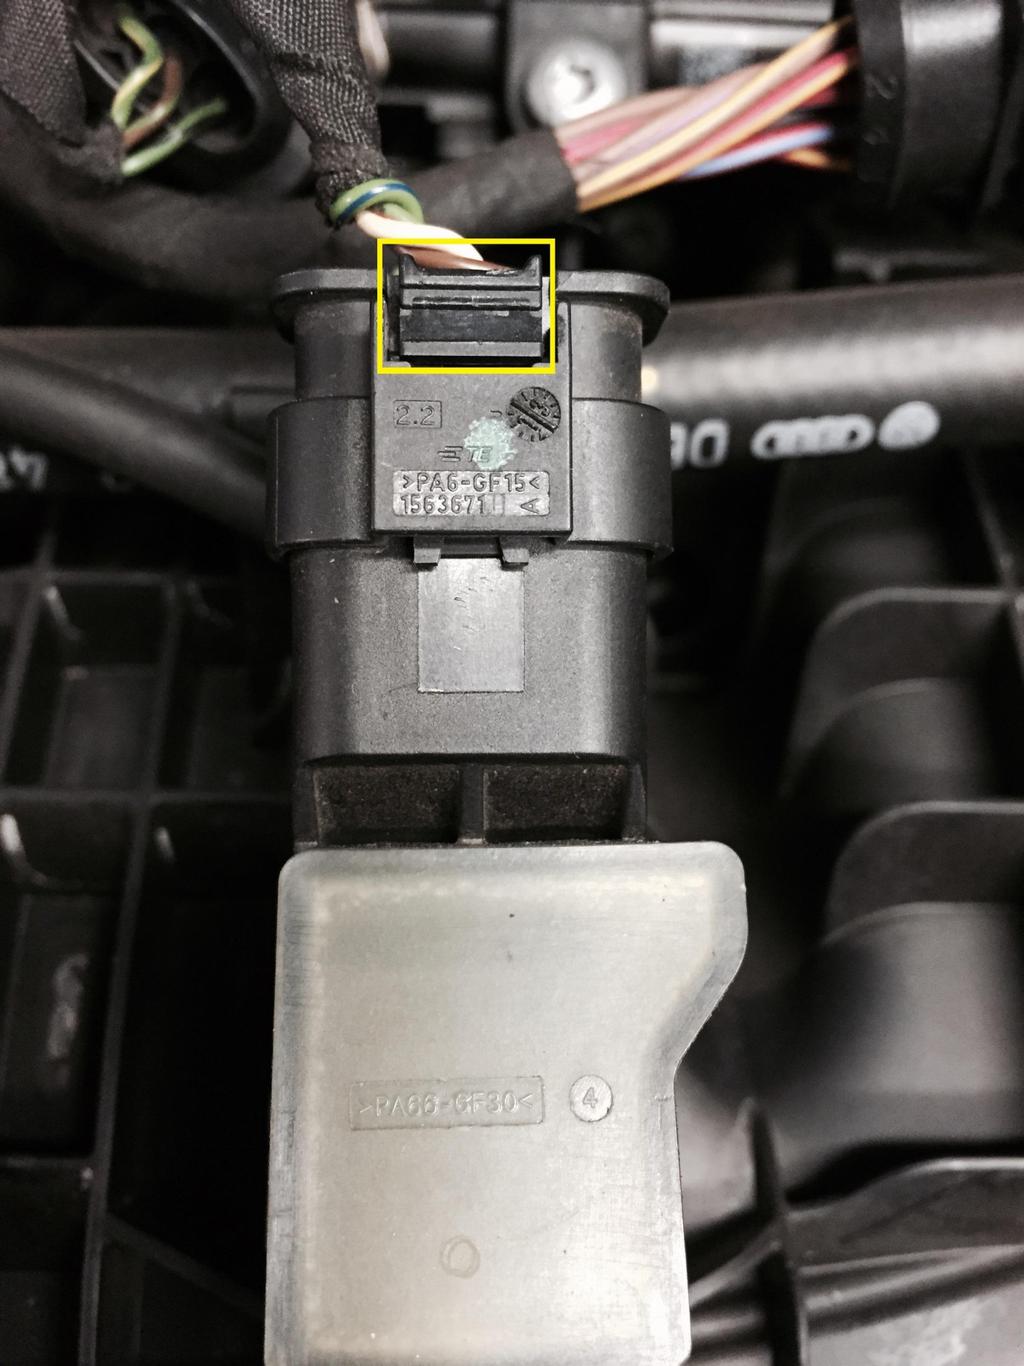 Step 4: Connect the JB1 harness to the car On the JB1 harness you will find male and female sets of plugs.